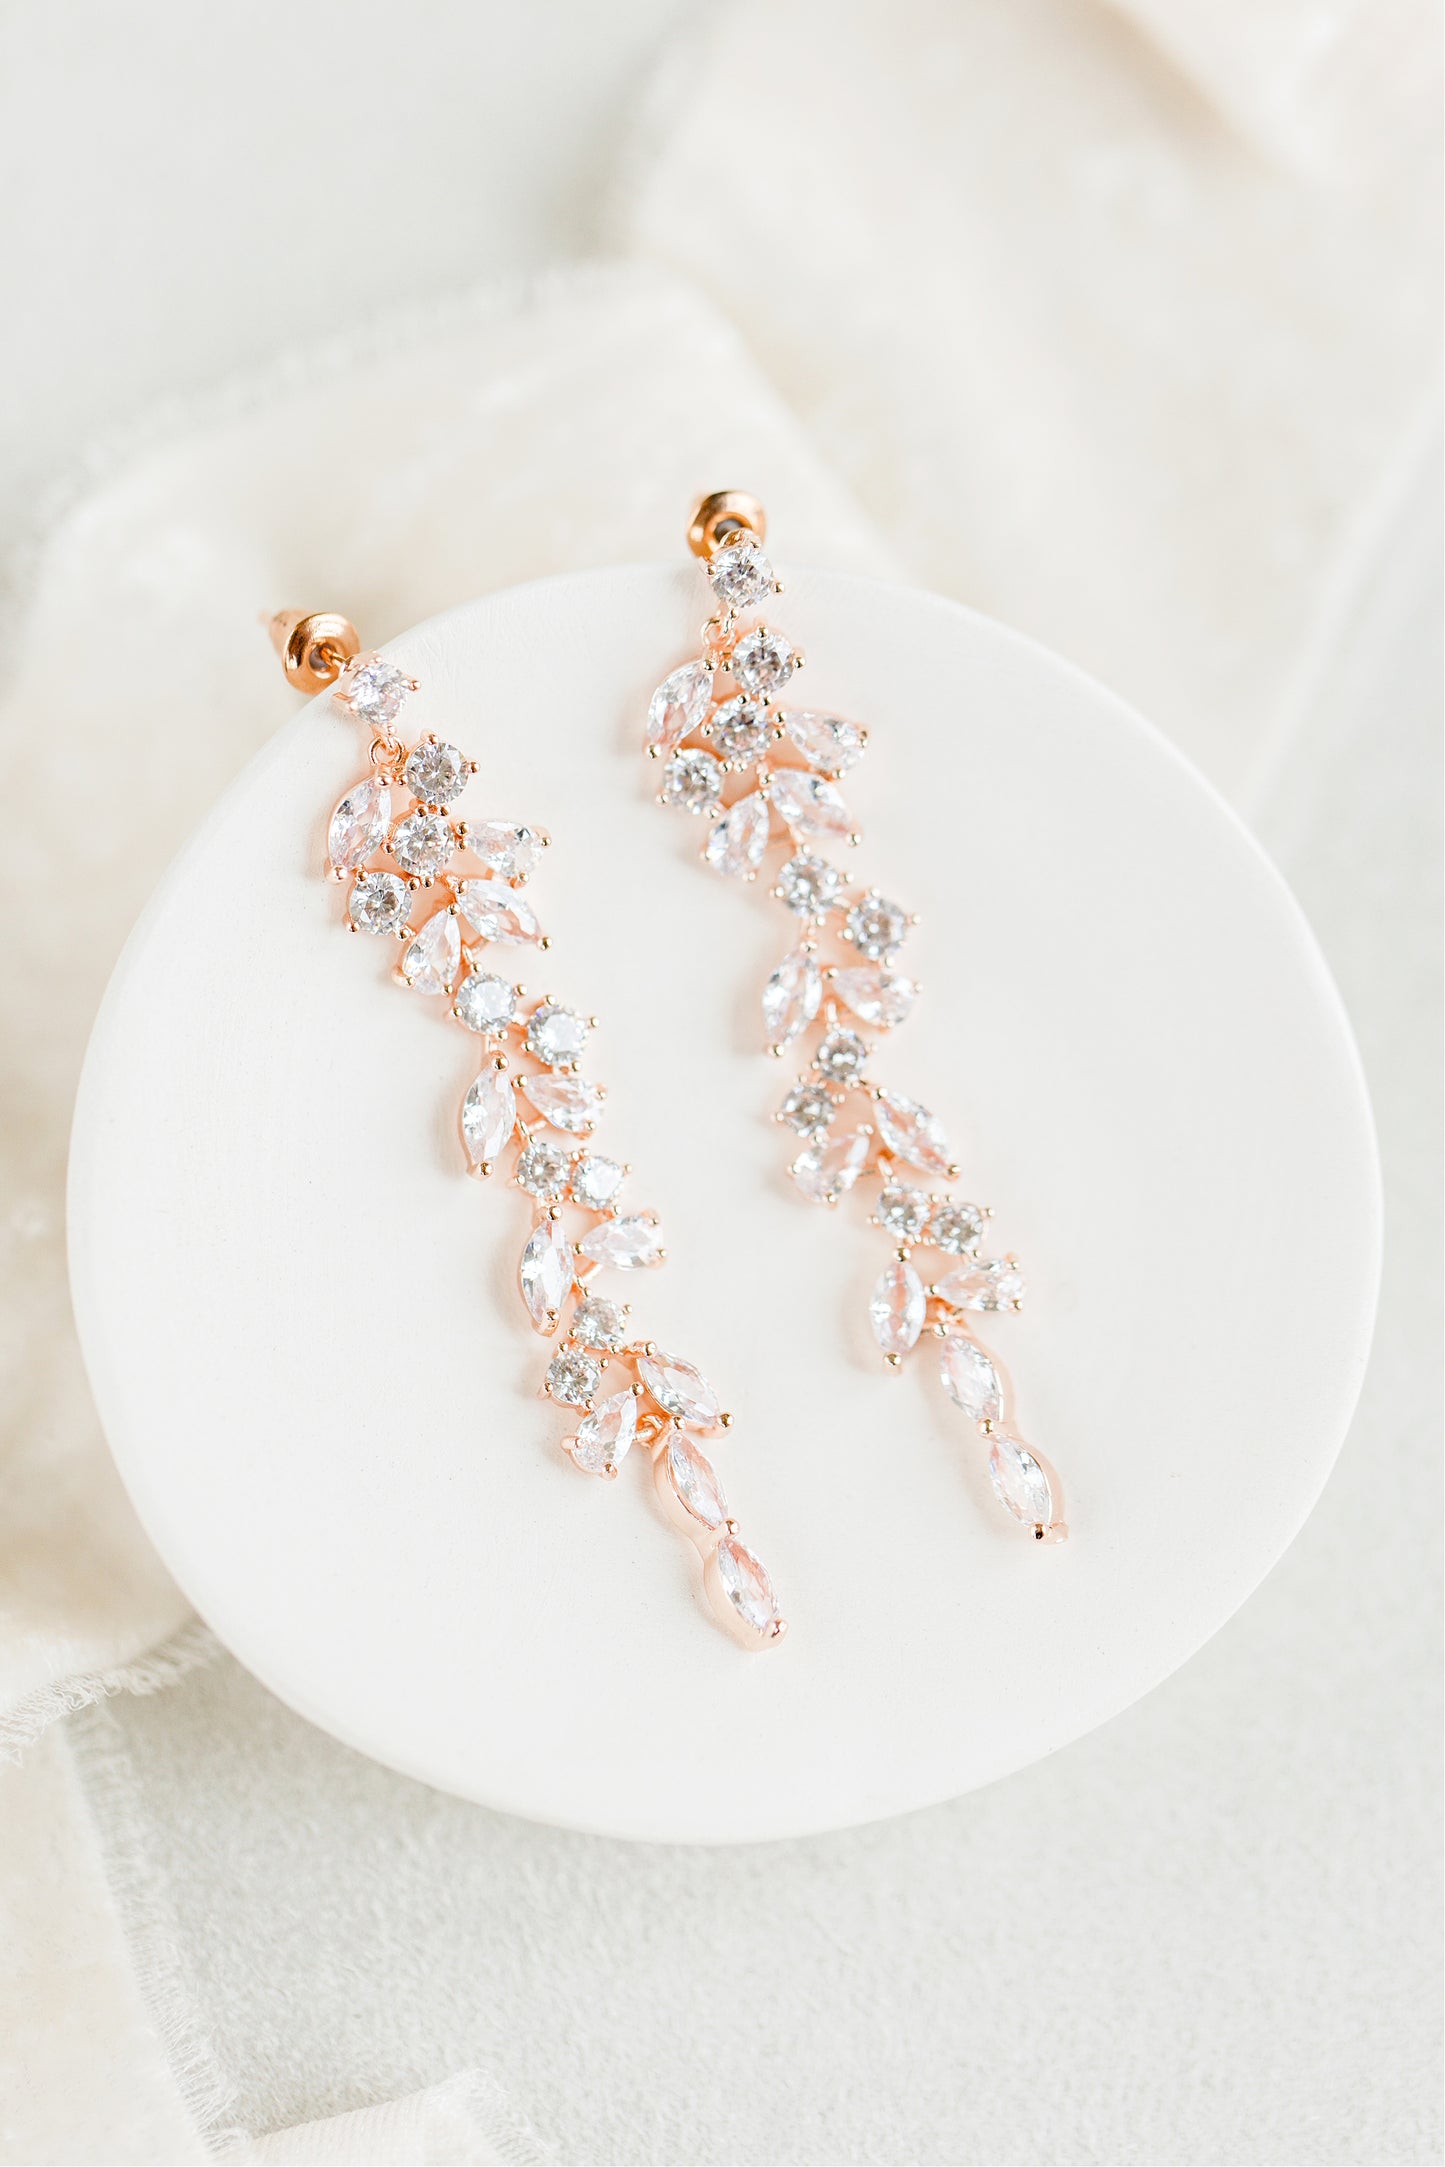 Tahmi - the art of woven metal: Classic Love Knot Drop Dangle Earrings in  Gold Mix (14K Yellow and Rose Gold Fill)